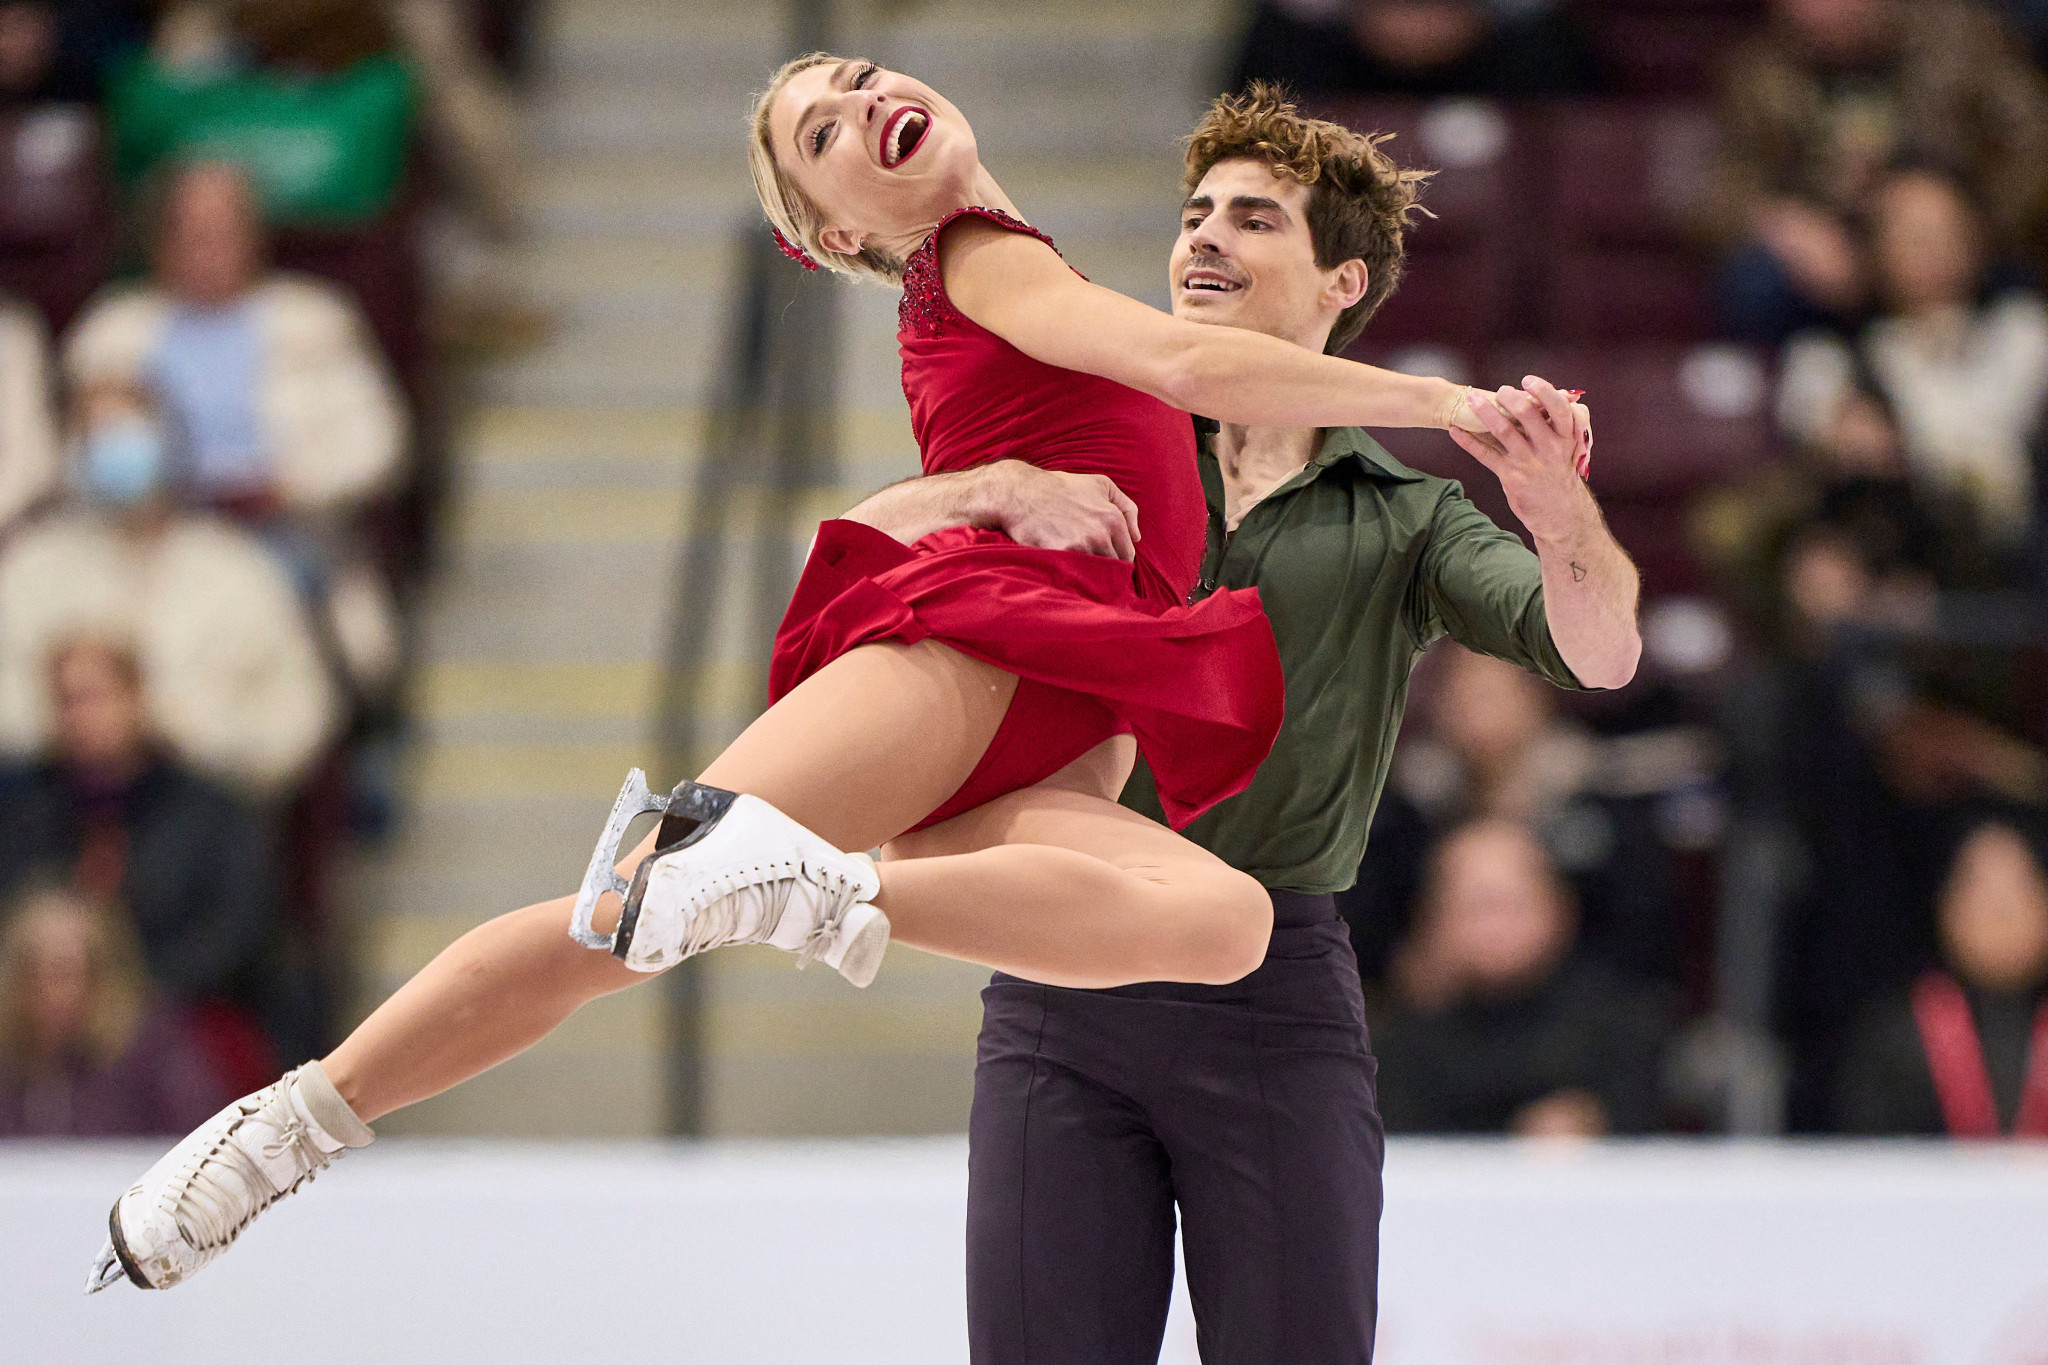 Canada's Piper Gilles and Paul Poirier won the ice dance in Ontario ©Getty Images